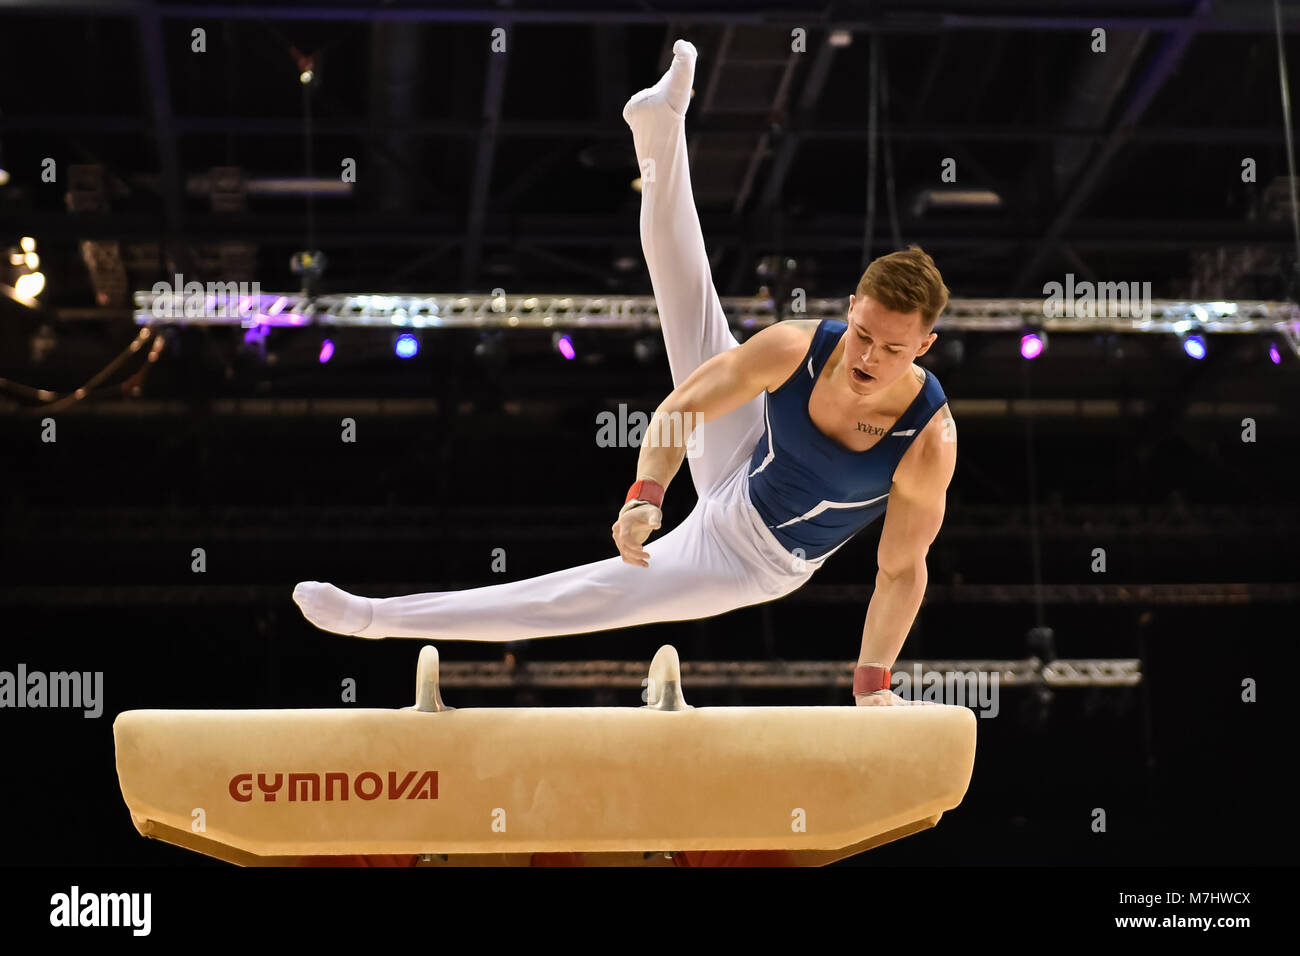 Liverpool, UK. 10th March, 2018. Bring Bevan of South Essex Gymnastics competes on the Pommel Horse during Men's All-Round of the 2018 Gymnastics British Championships at Echo Arena on Saturday, 10 March 2018. LIVERPOOL ENGLAND. Credit: Taka G Wu Credit: Taka Wu/Alamy Live News Stock Photo